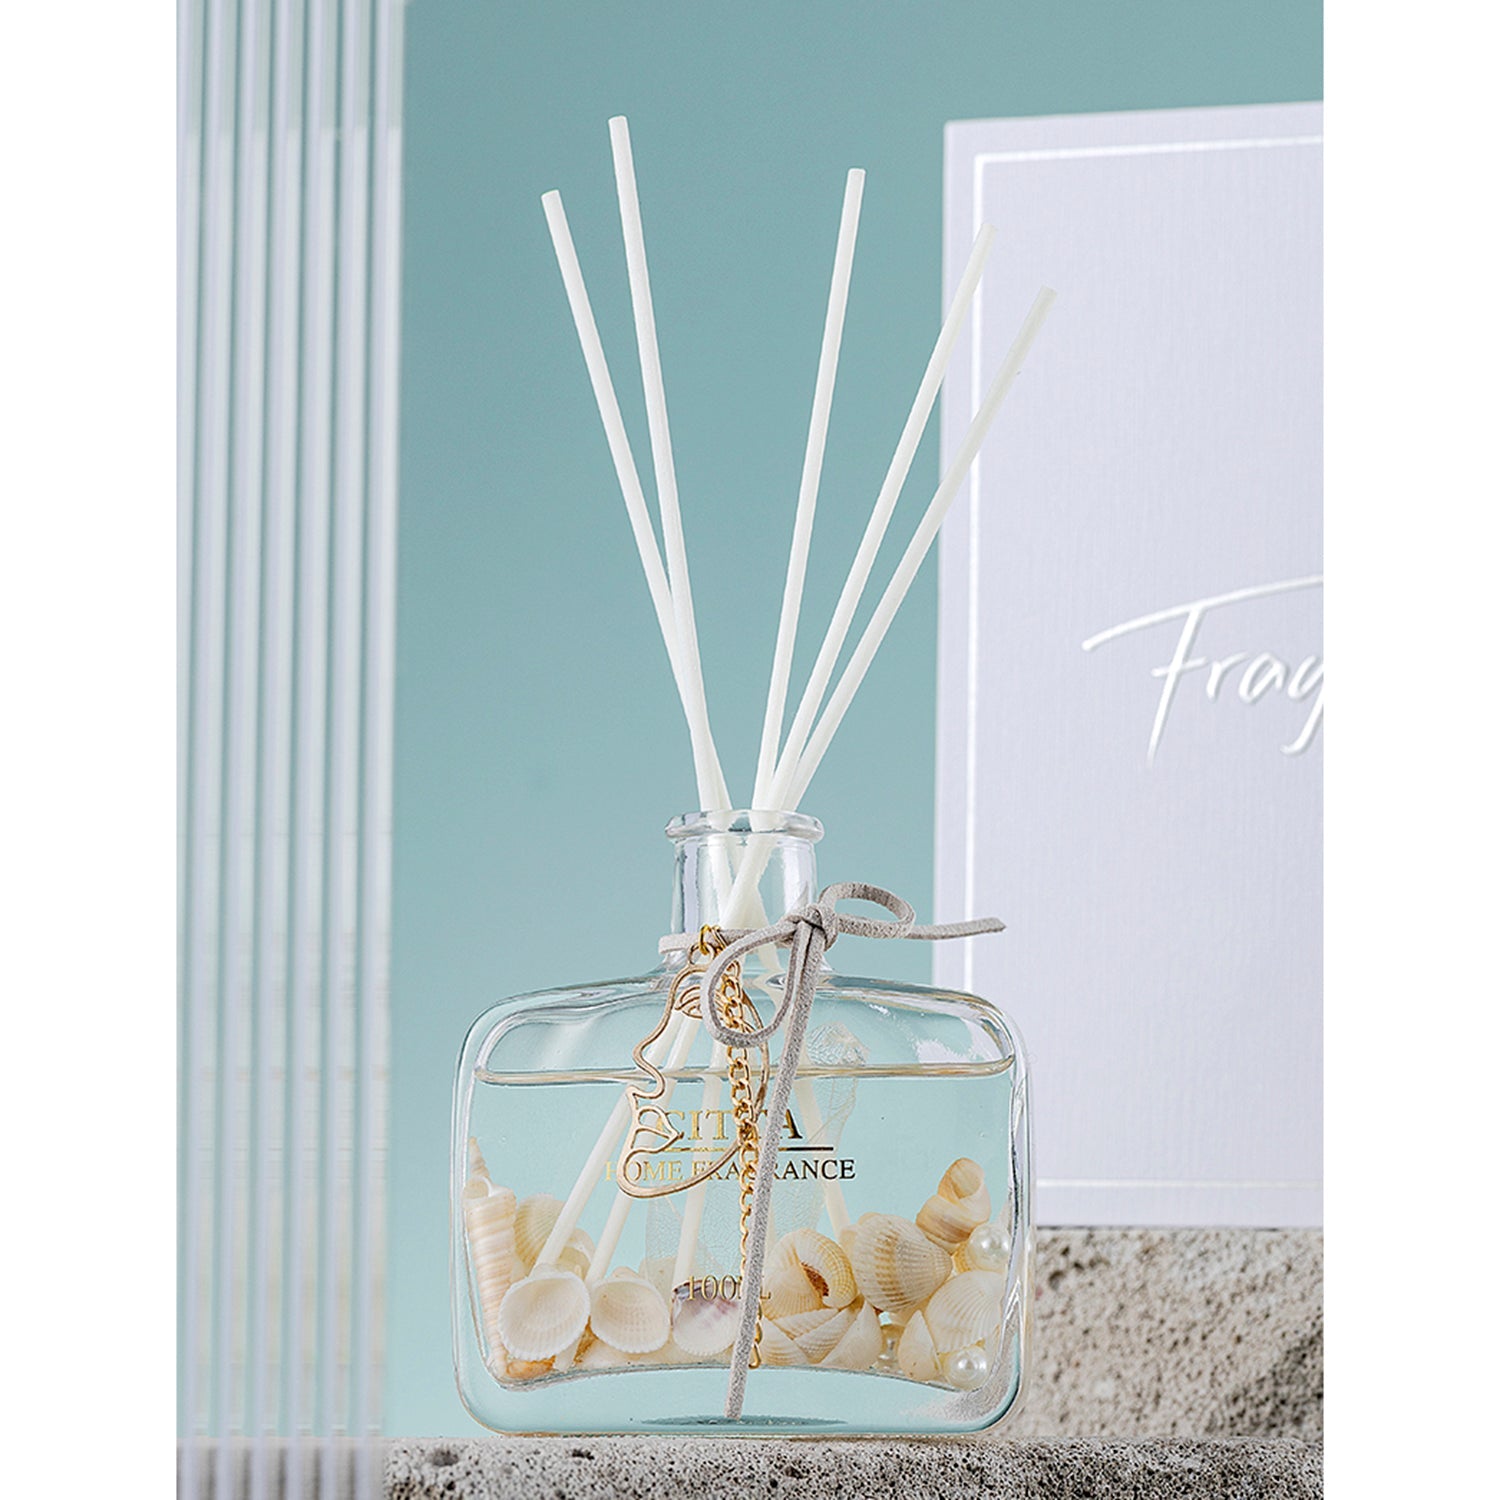 CITTA Summer Ocean Series Reed Diffuser Aromatherapy 100ML Premium Essential Oil with Reed Stick and Conch/Pearl Reed Diffuser CITTA 